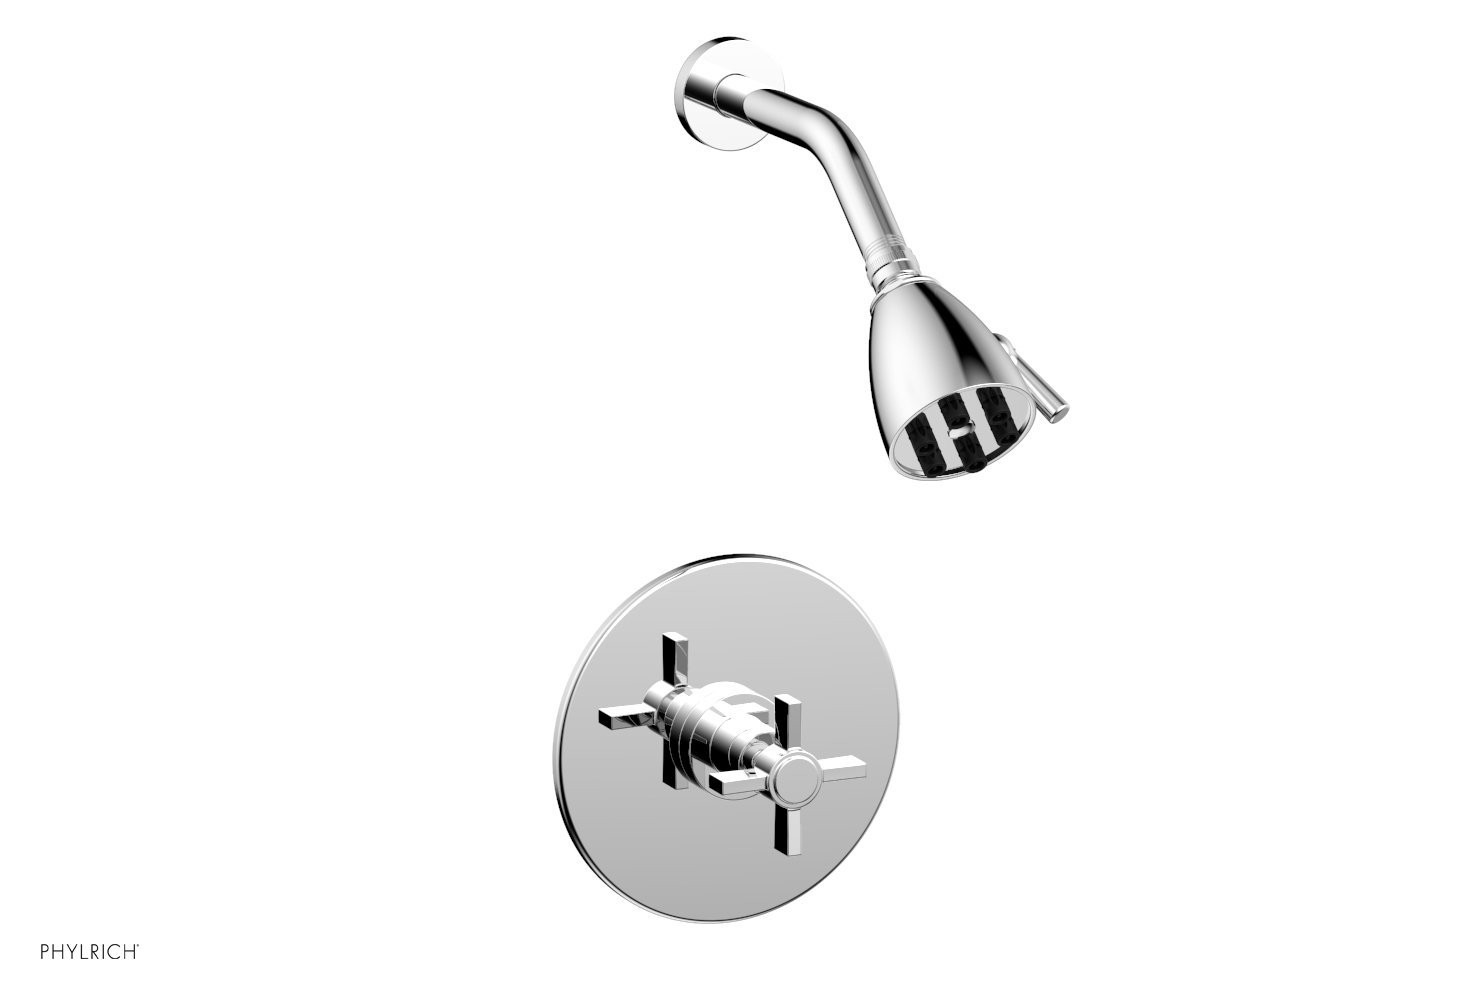 PHYLRICH DPB3137 BASIC WALL MOUNT PRESSURE BALANCE SHOWER SET WITH BLADE CROSS HANDLE